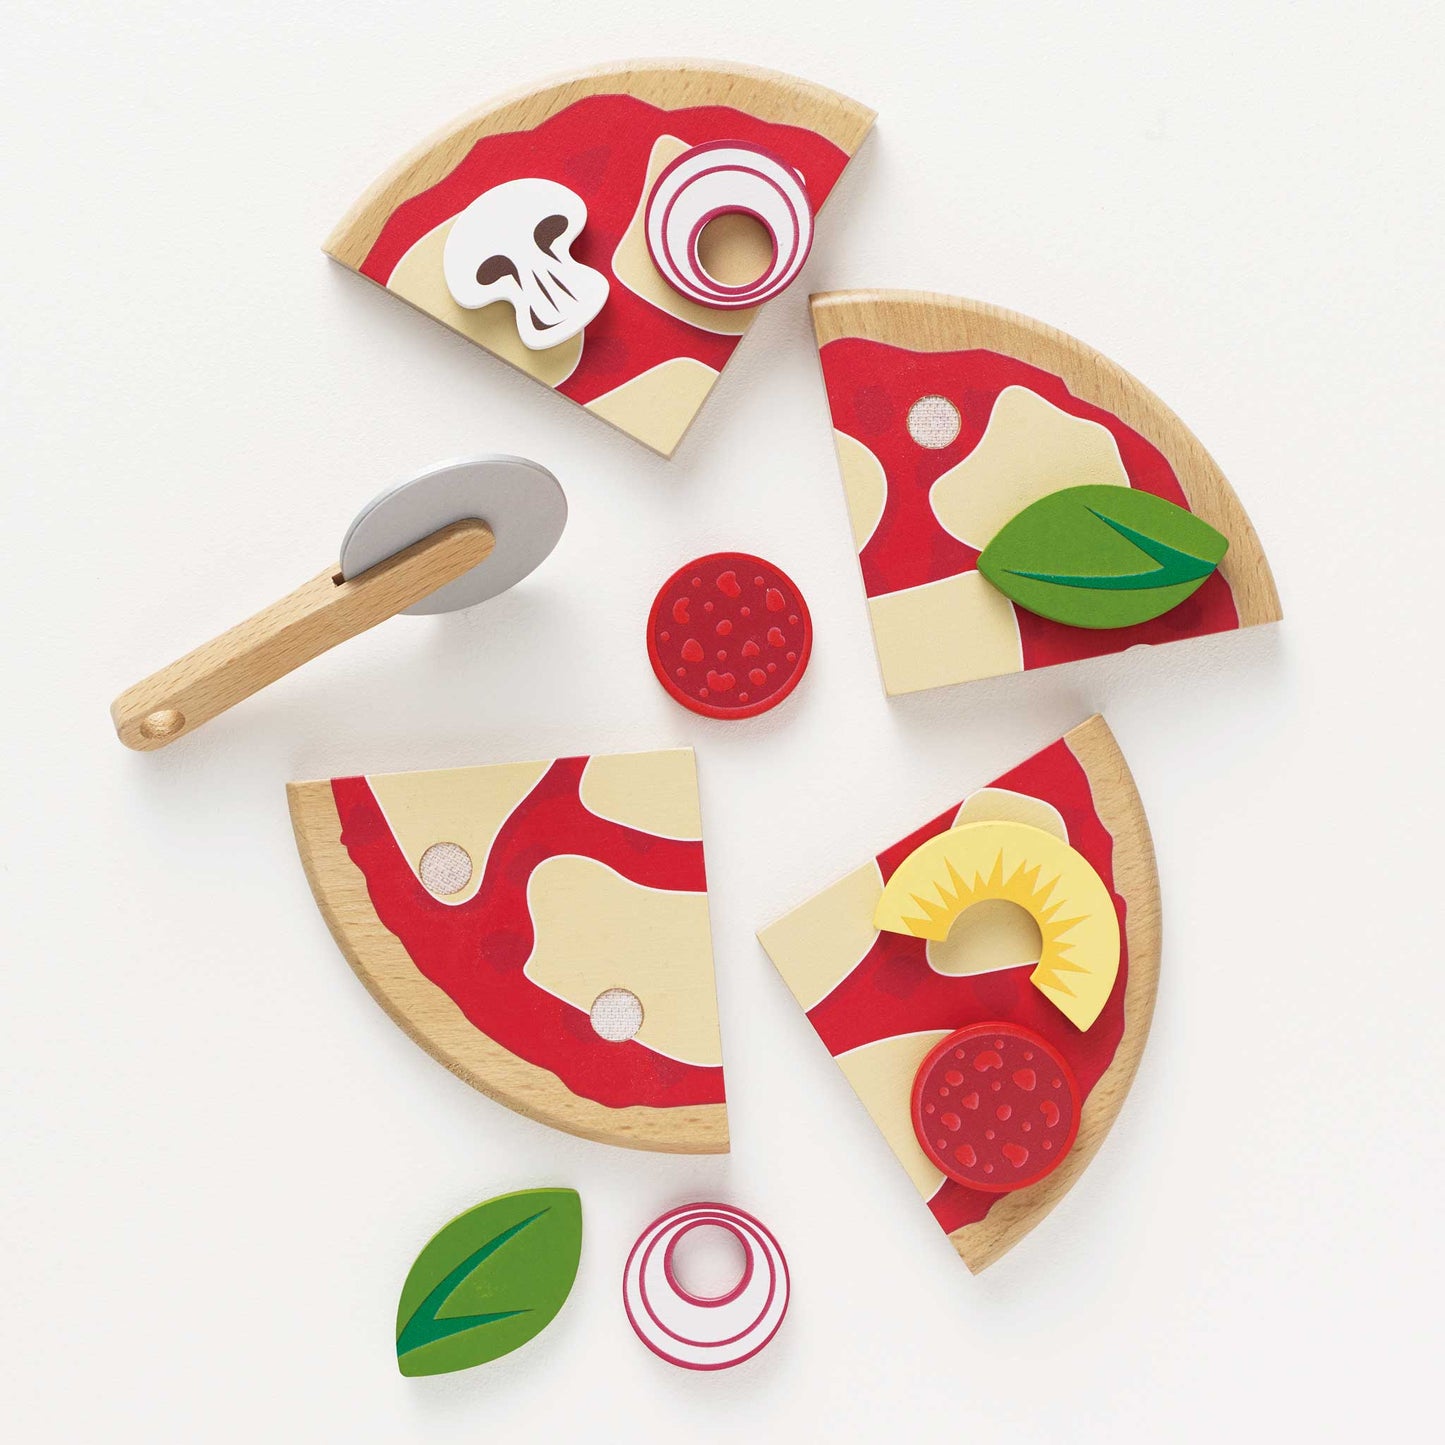 Pizza and Toppings with Slice Cutter